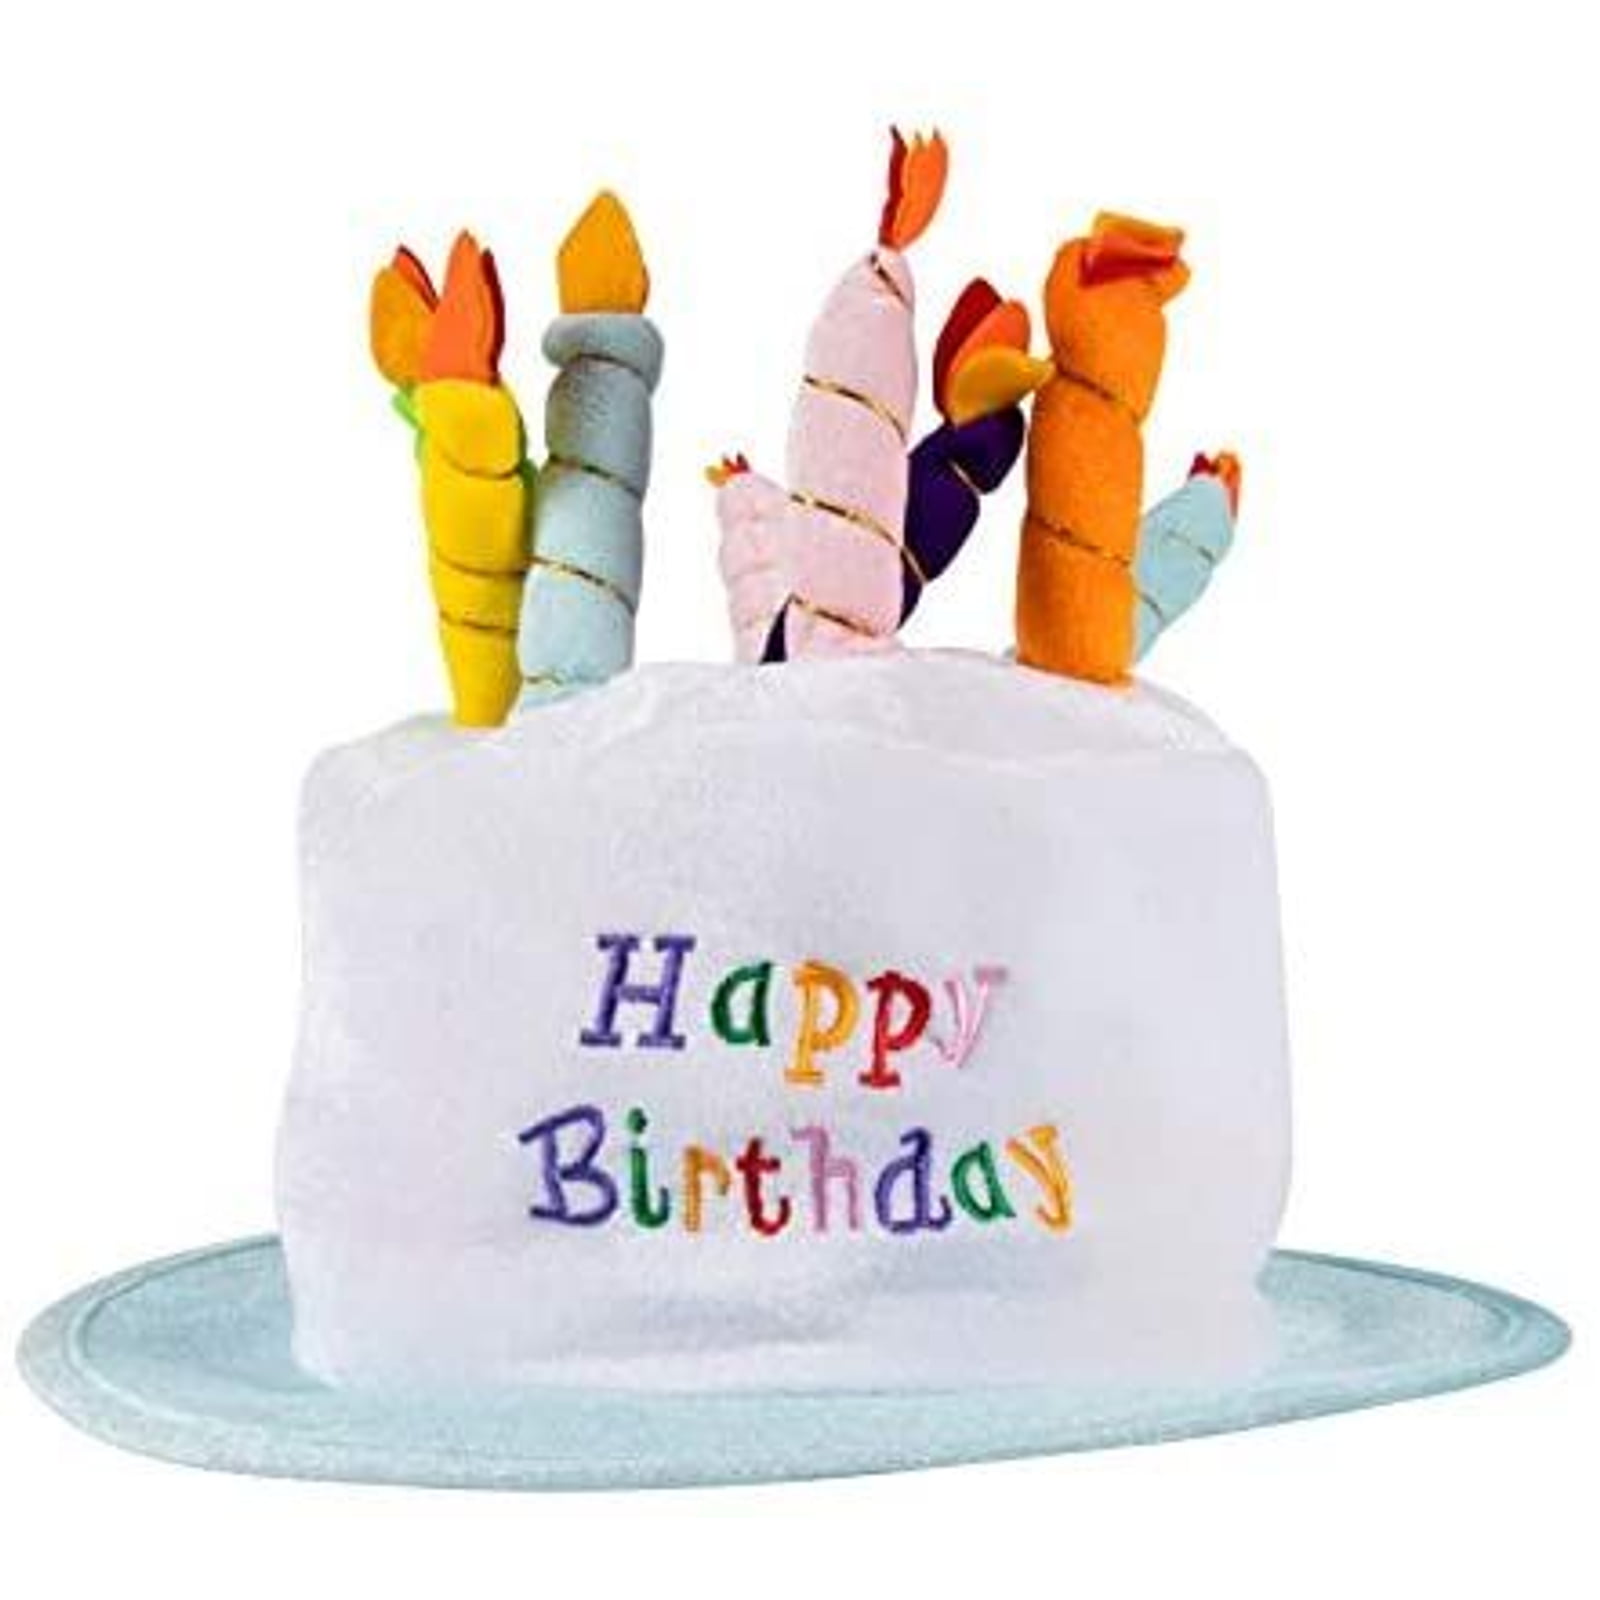 BLUE TINSEL BIRTHDAY CAKE NOVELTY HAT WITH CANDLES 